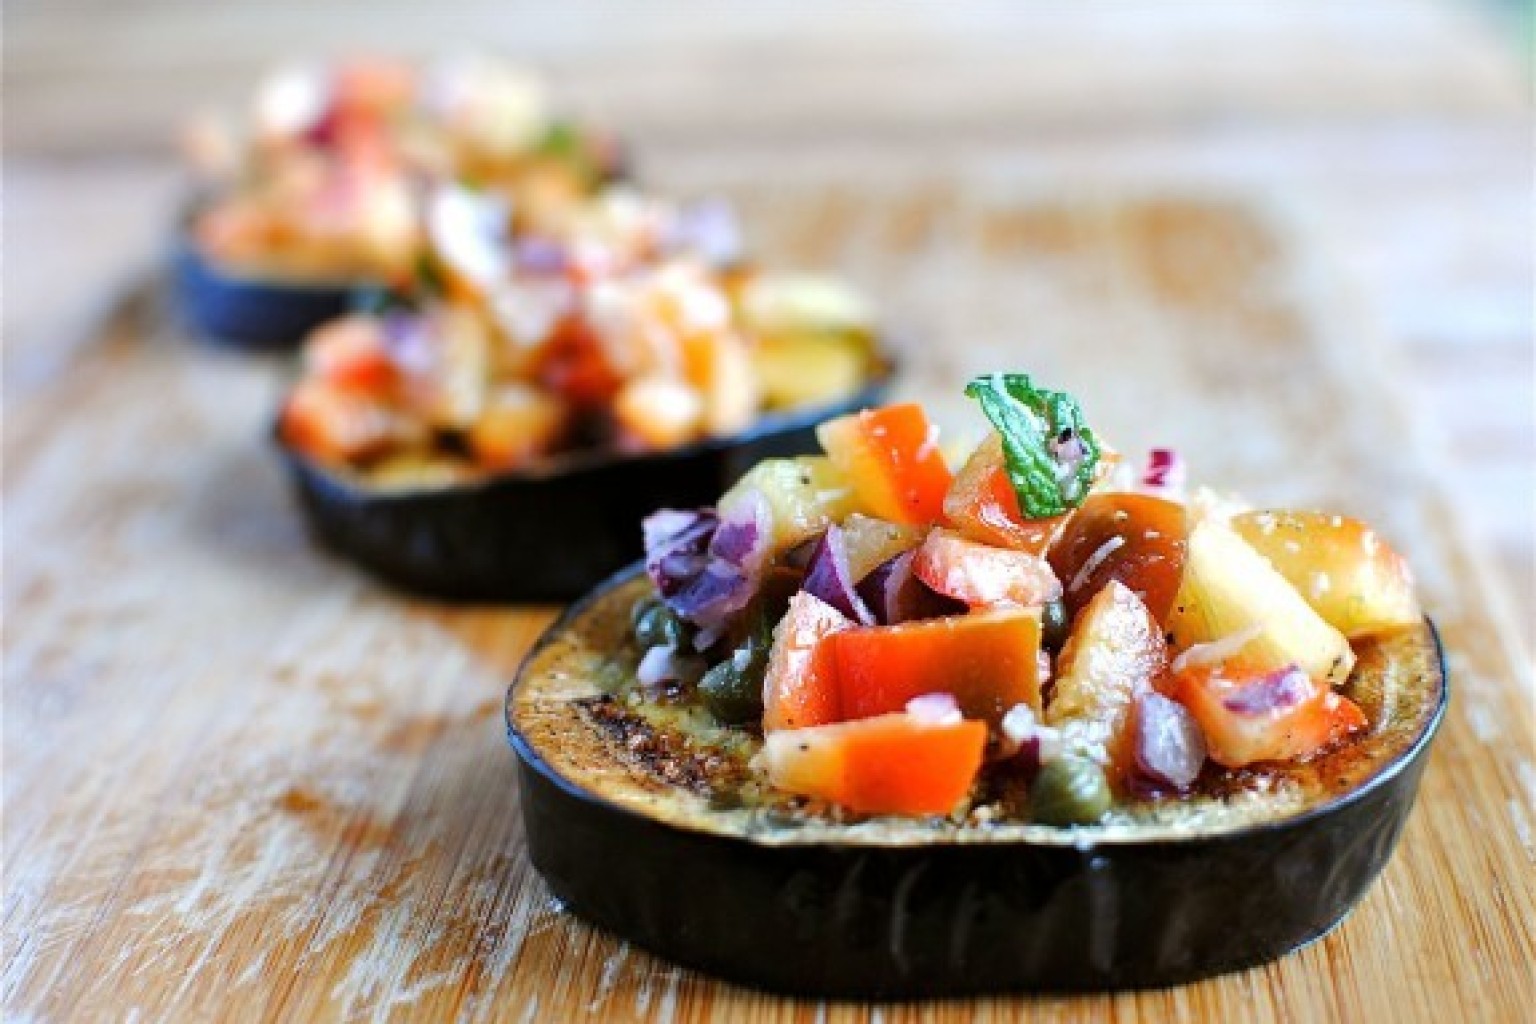 Eggplant Recipes That'll Make This Summer More Delicious | HuffPost